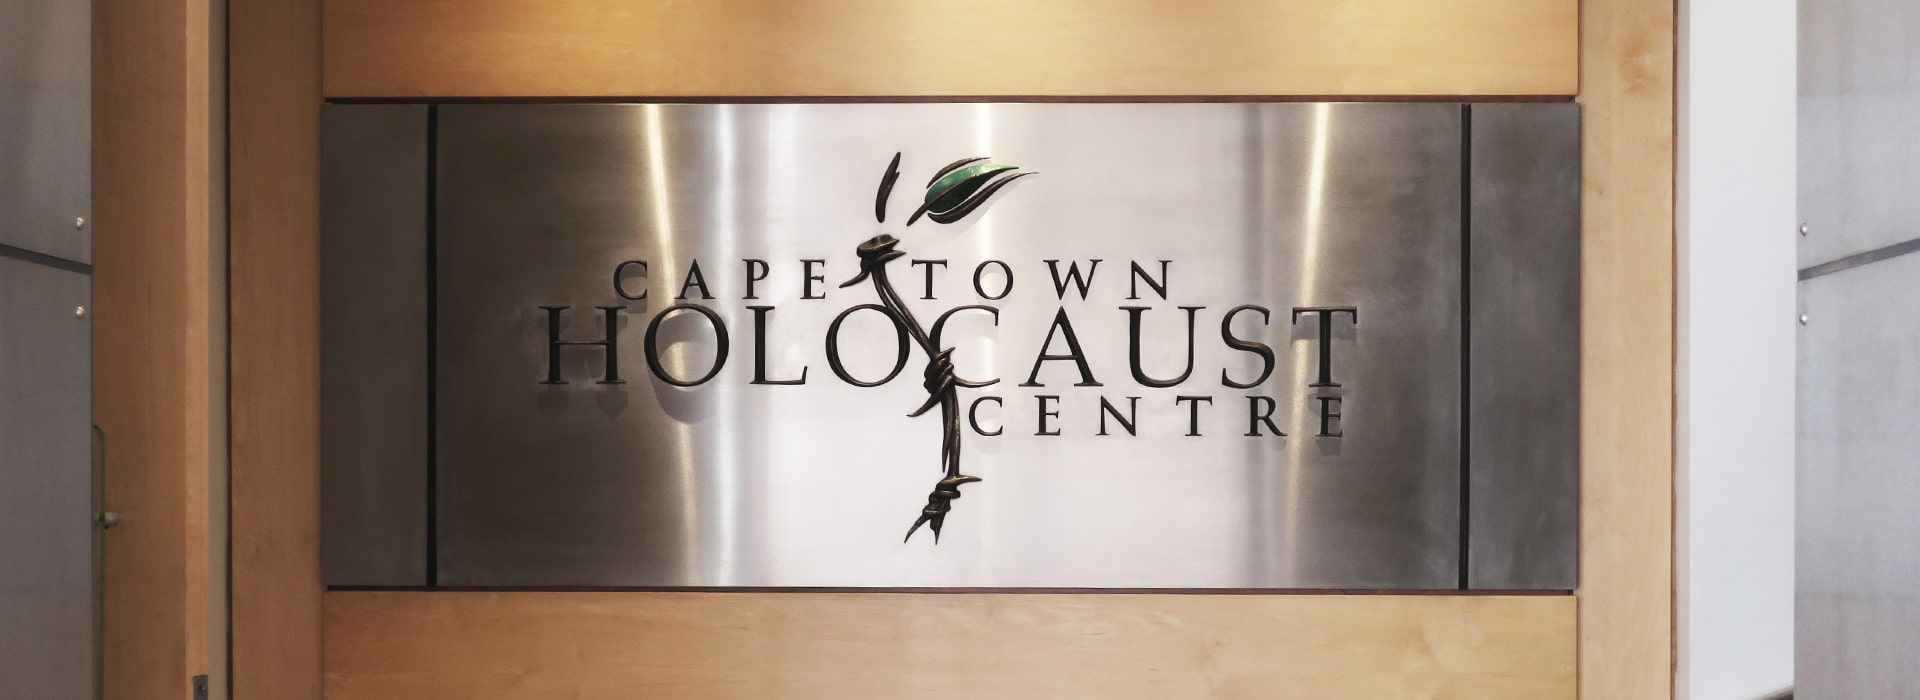 Contact - Cape Town Holocaust and Genocide Centre